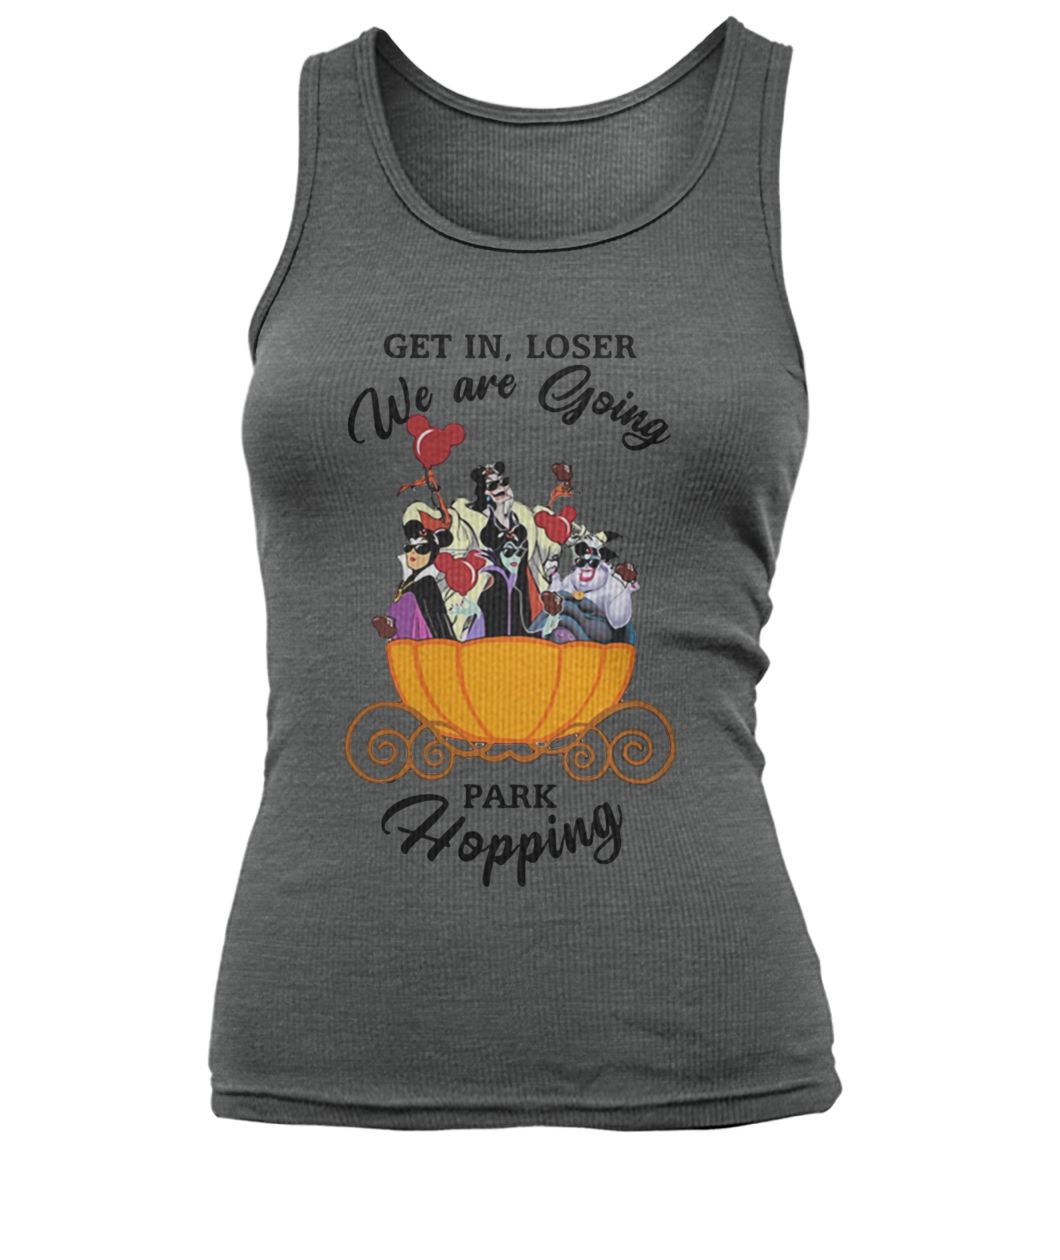 Disney villains get in loser we are going park hopping women's tank top